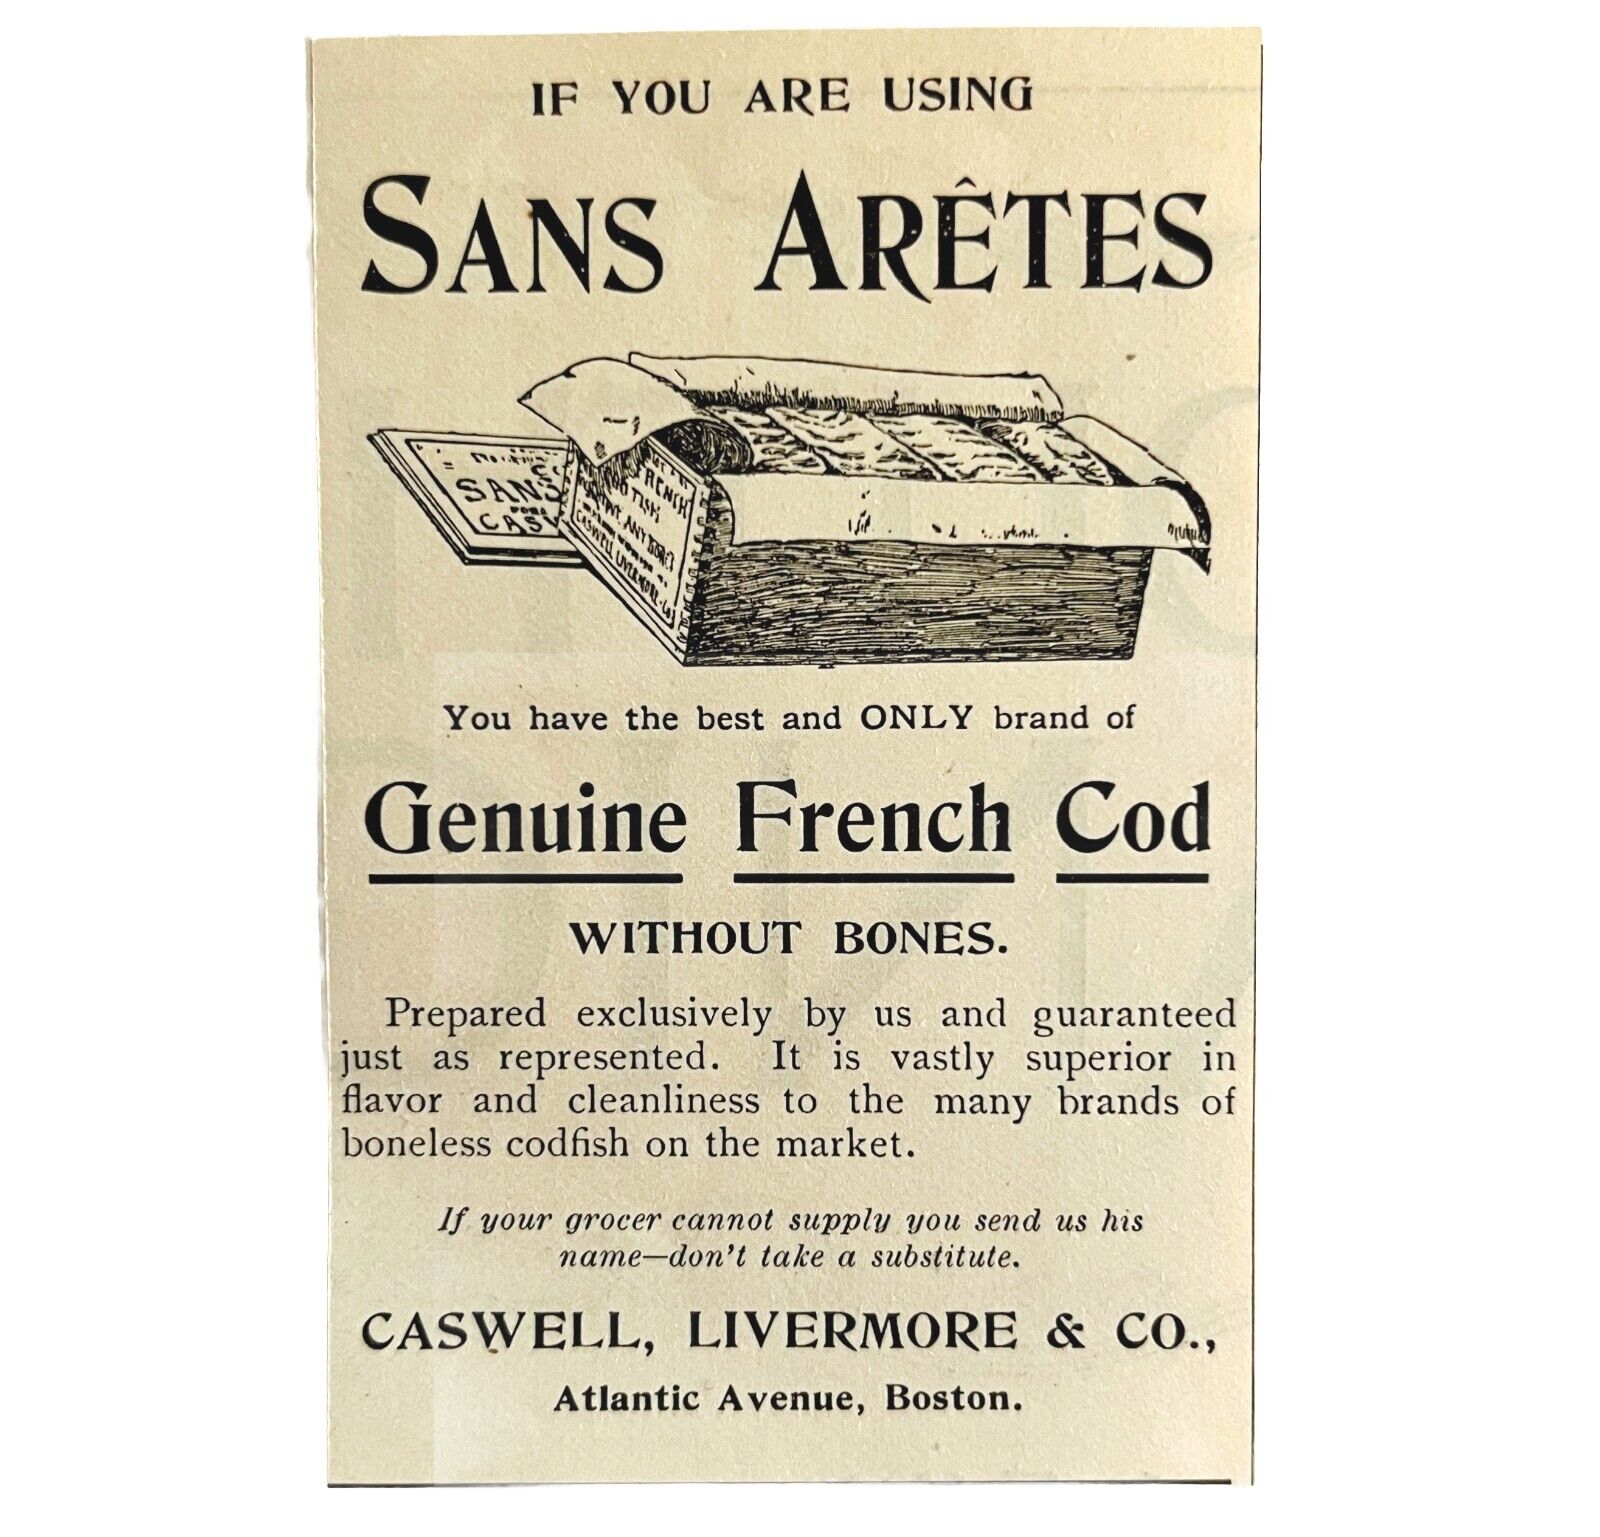 San Aretes Cod Fish 1894 Advertisement Victorian Caswell Livermore 3 ADBN1oo